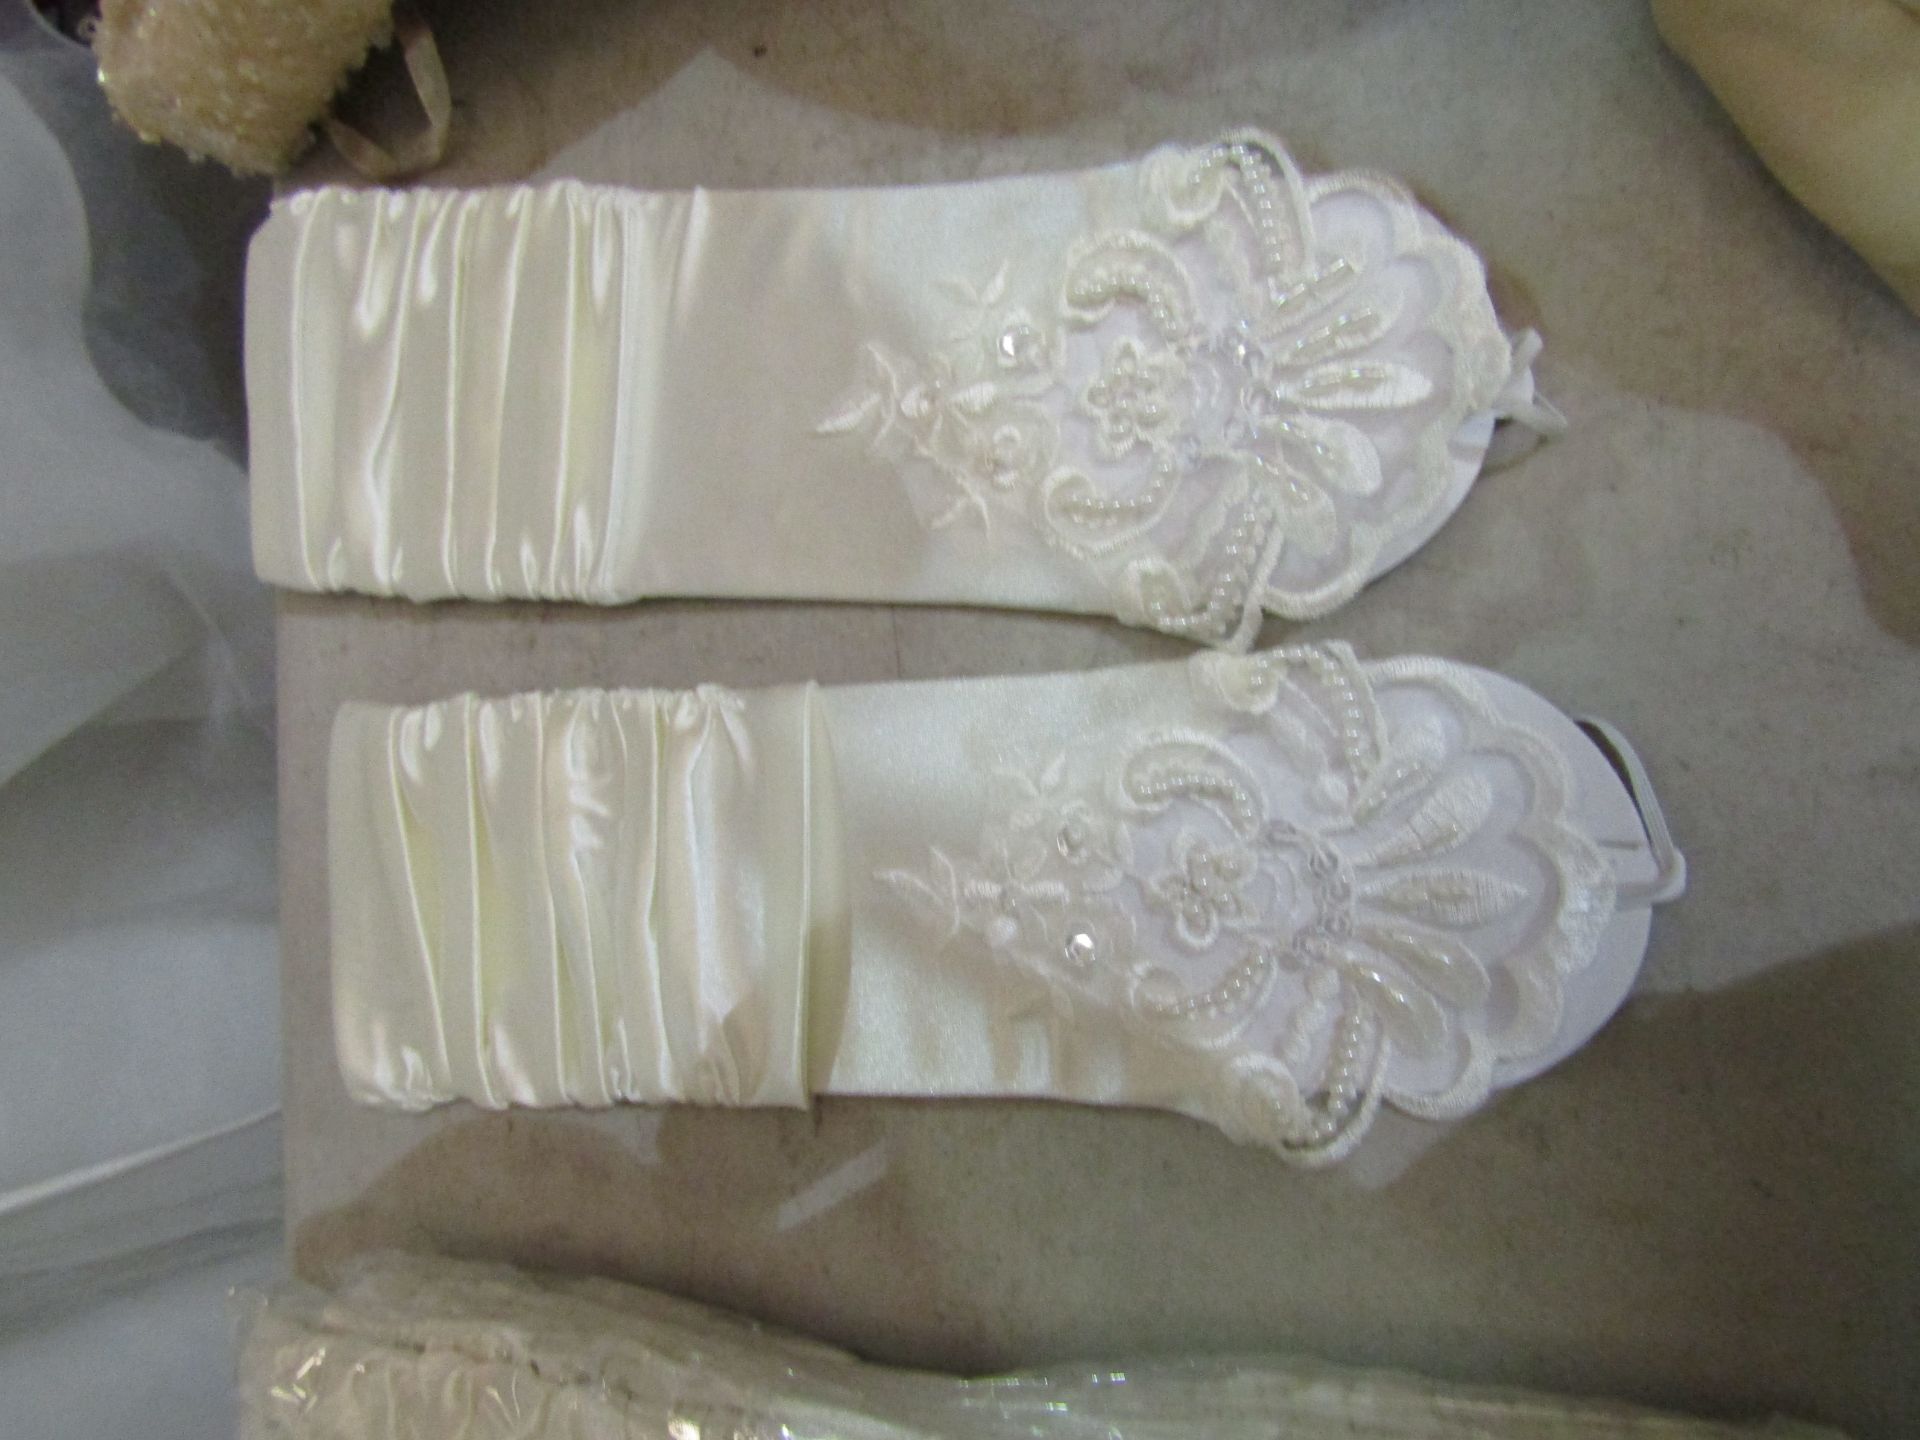 Approx 500 pieces of wedding shop stock to include wedding dresses, mother of the bride, dresses, - Image 26 of 108